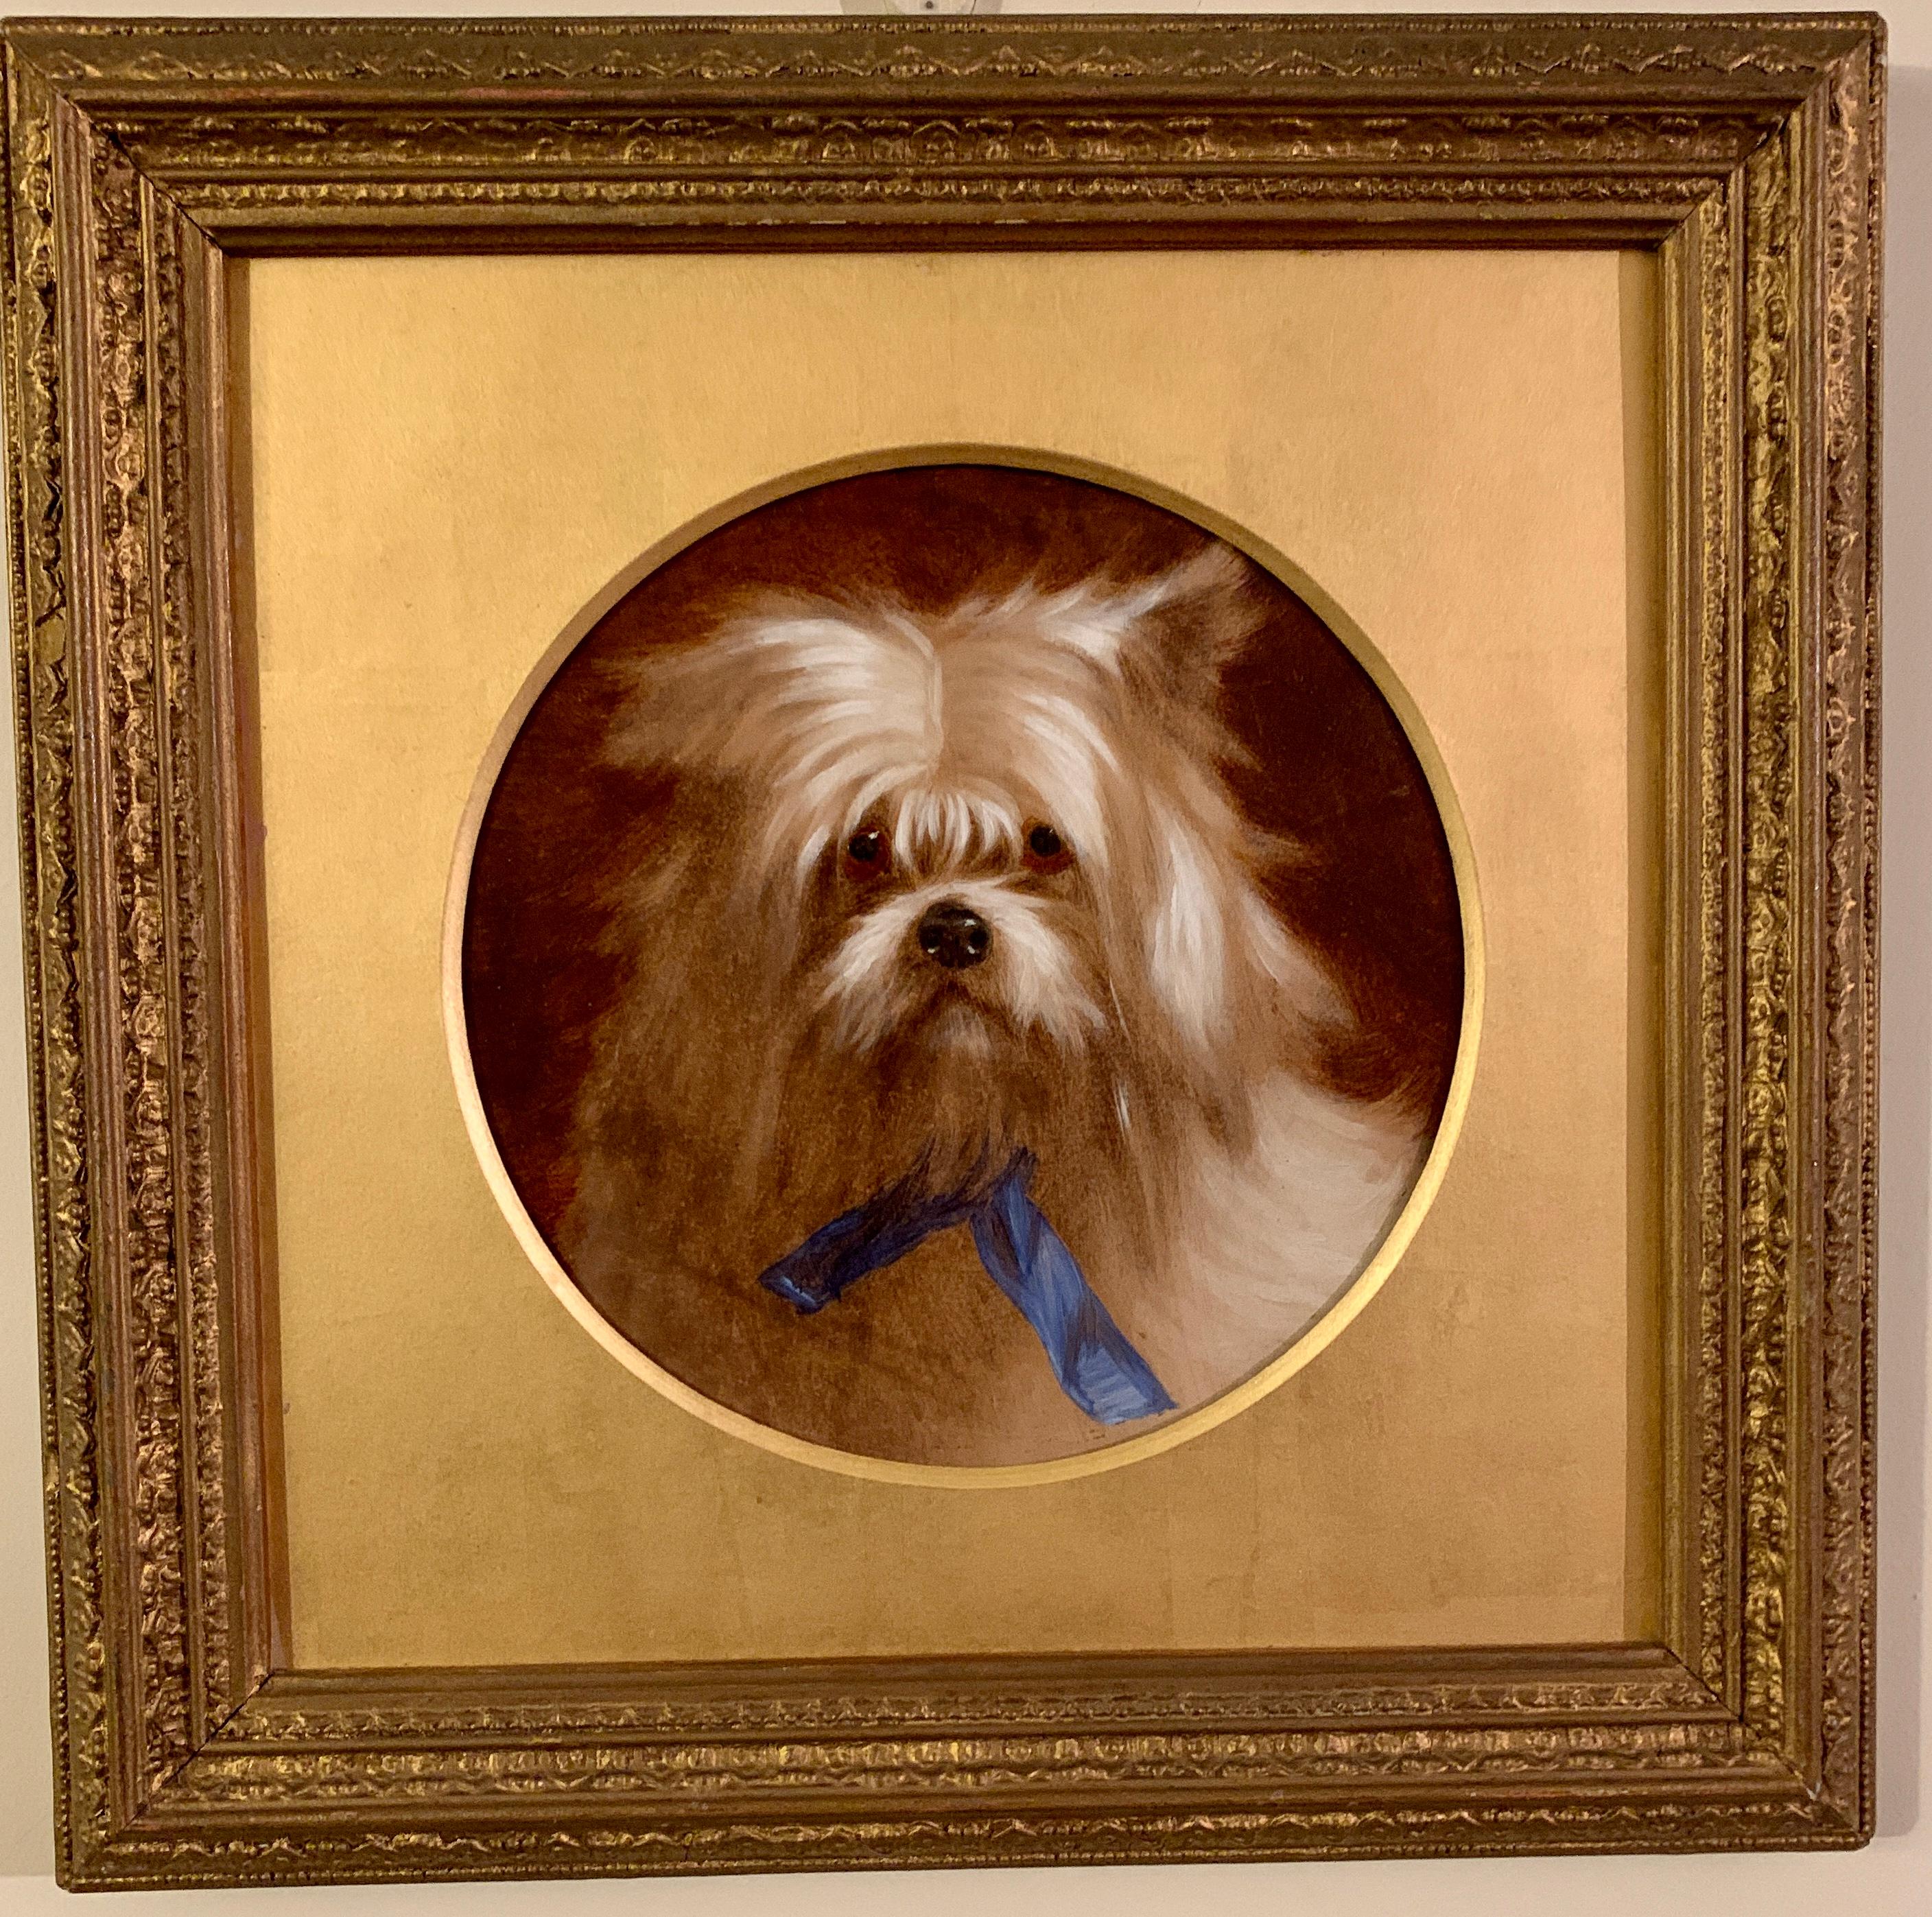 Thomas Earl Figurative Painting - English Victorian 19th century oil portrait of a white terrier toy or lap dog